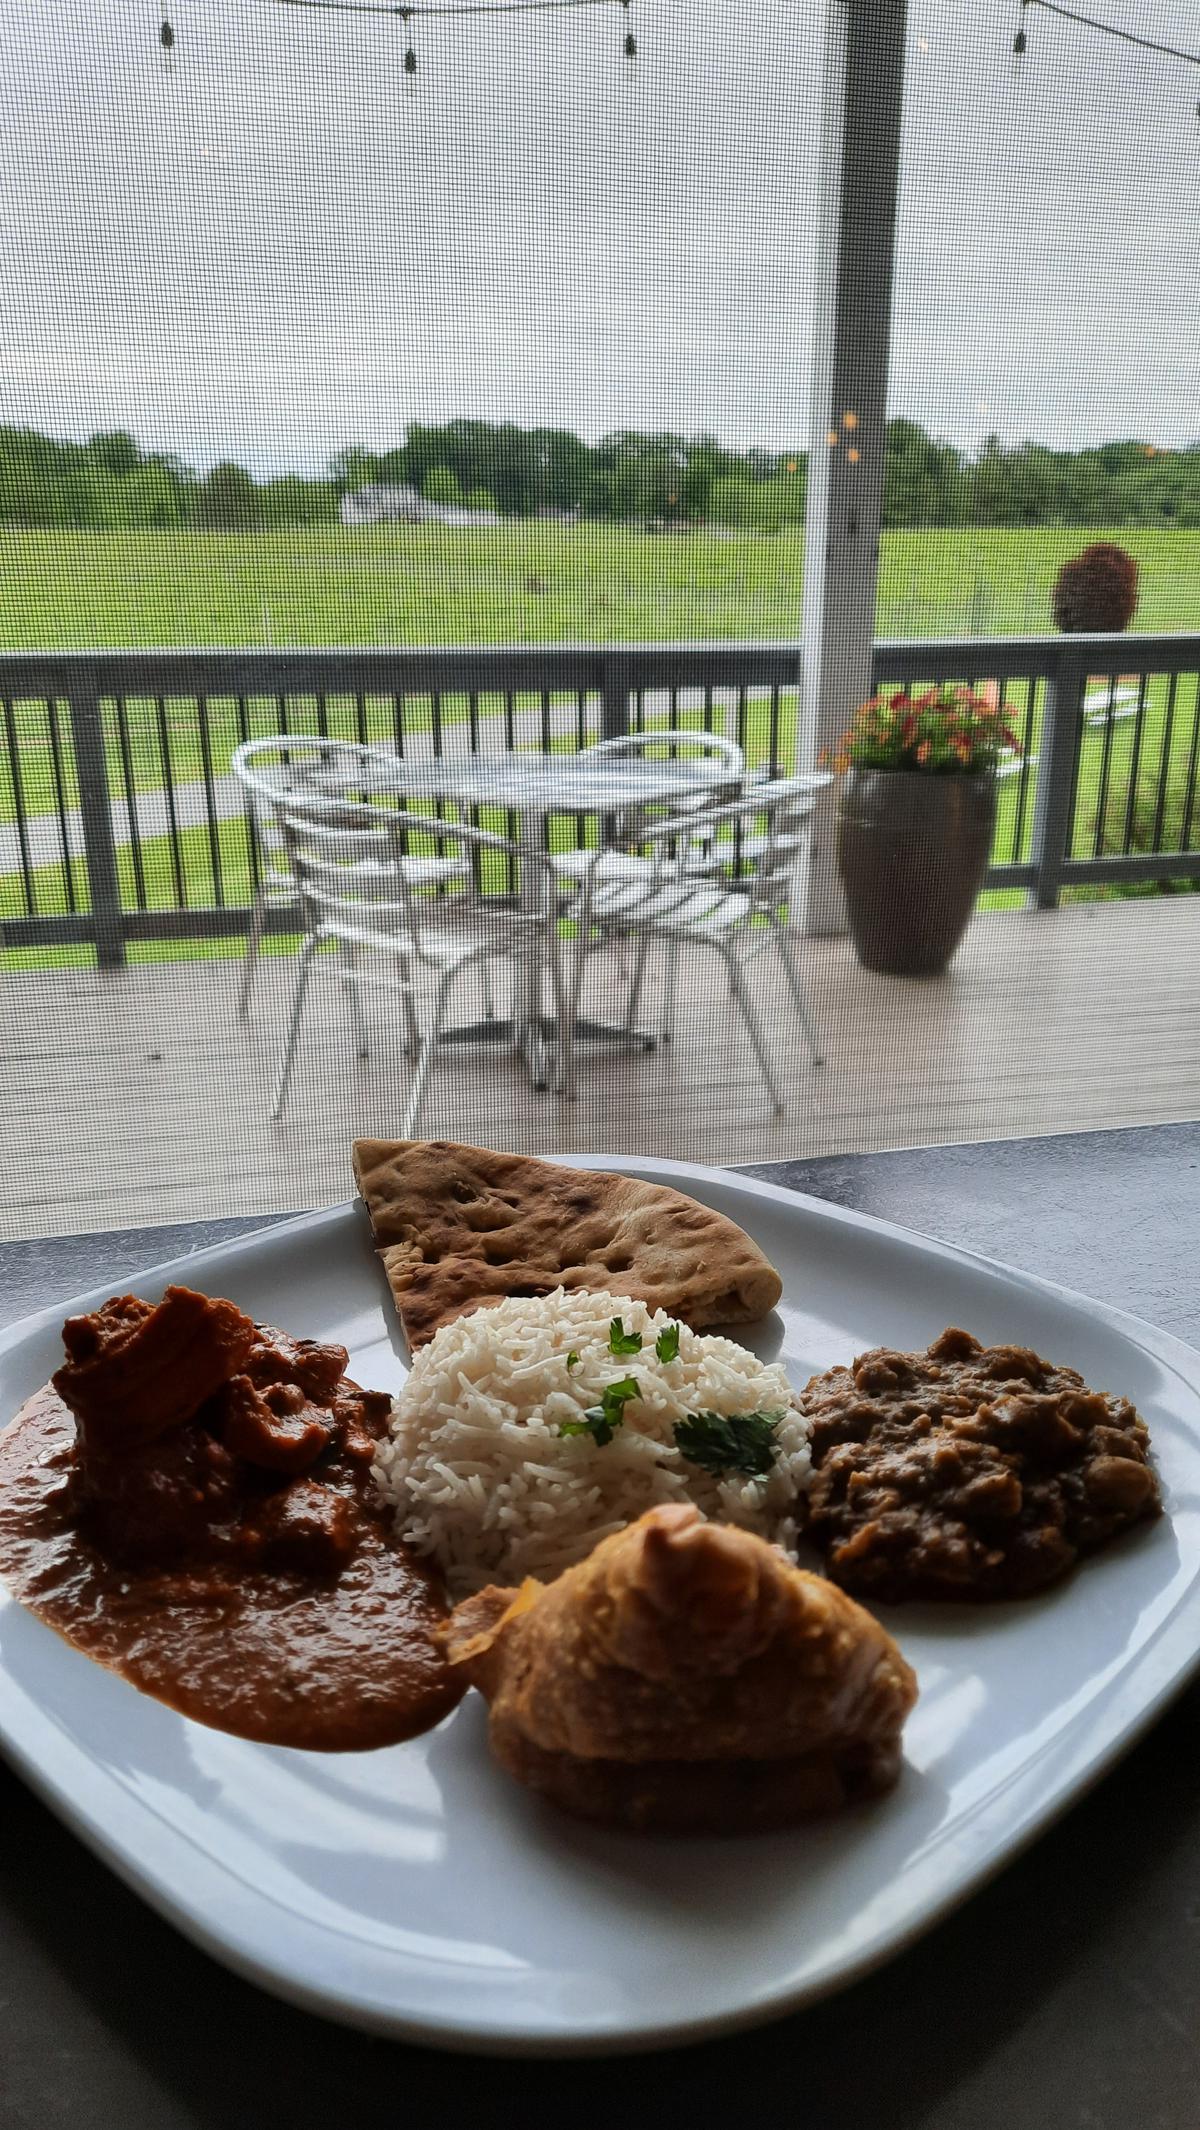 Wine pairings with Indian food at Narmada Winery